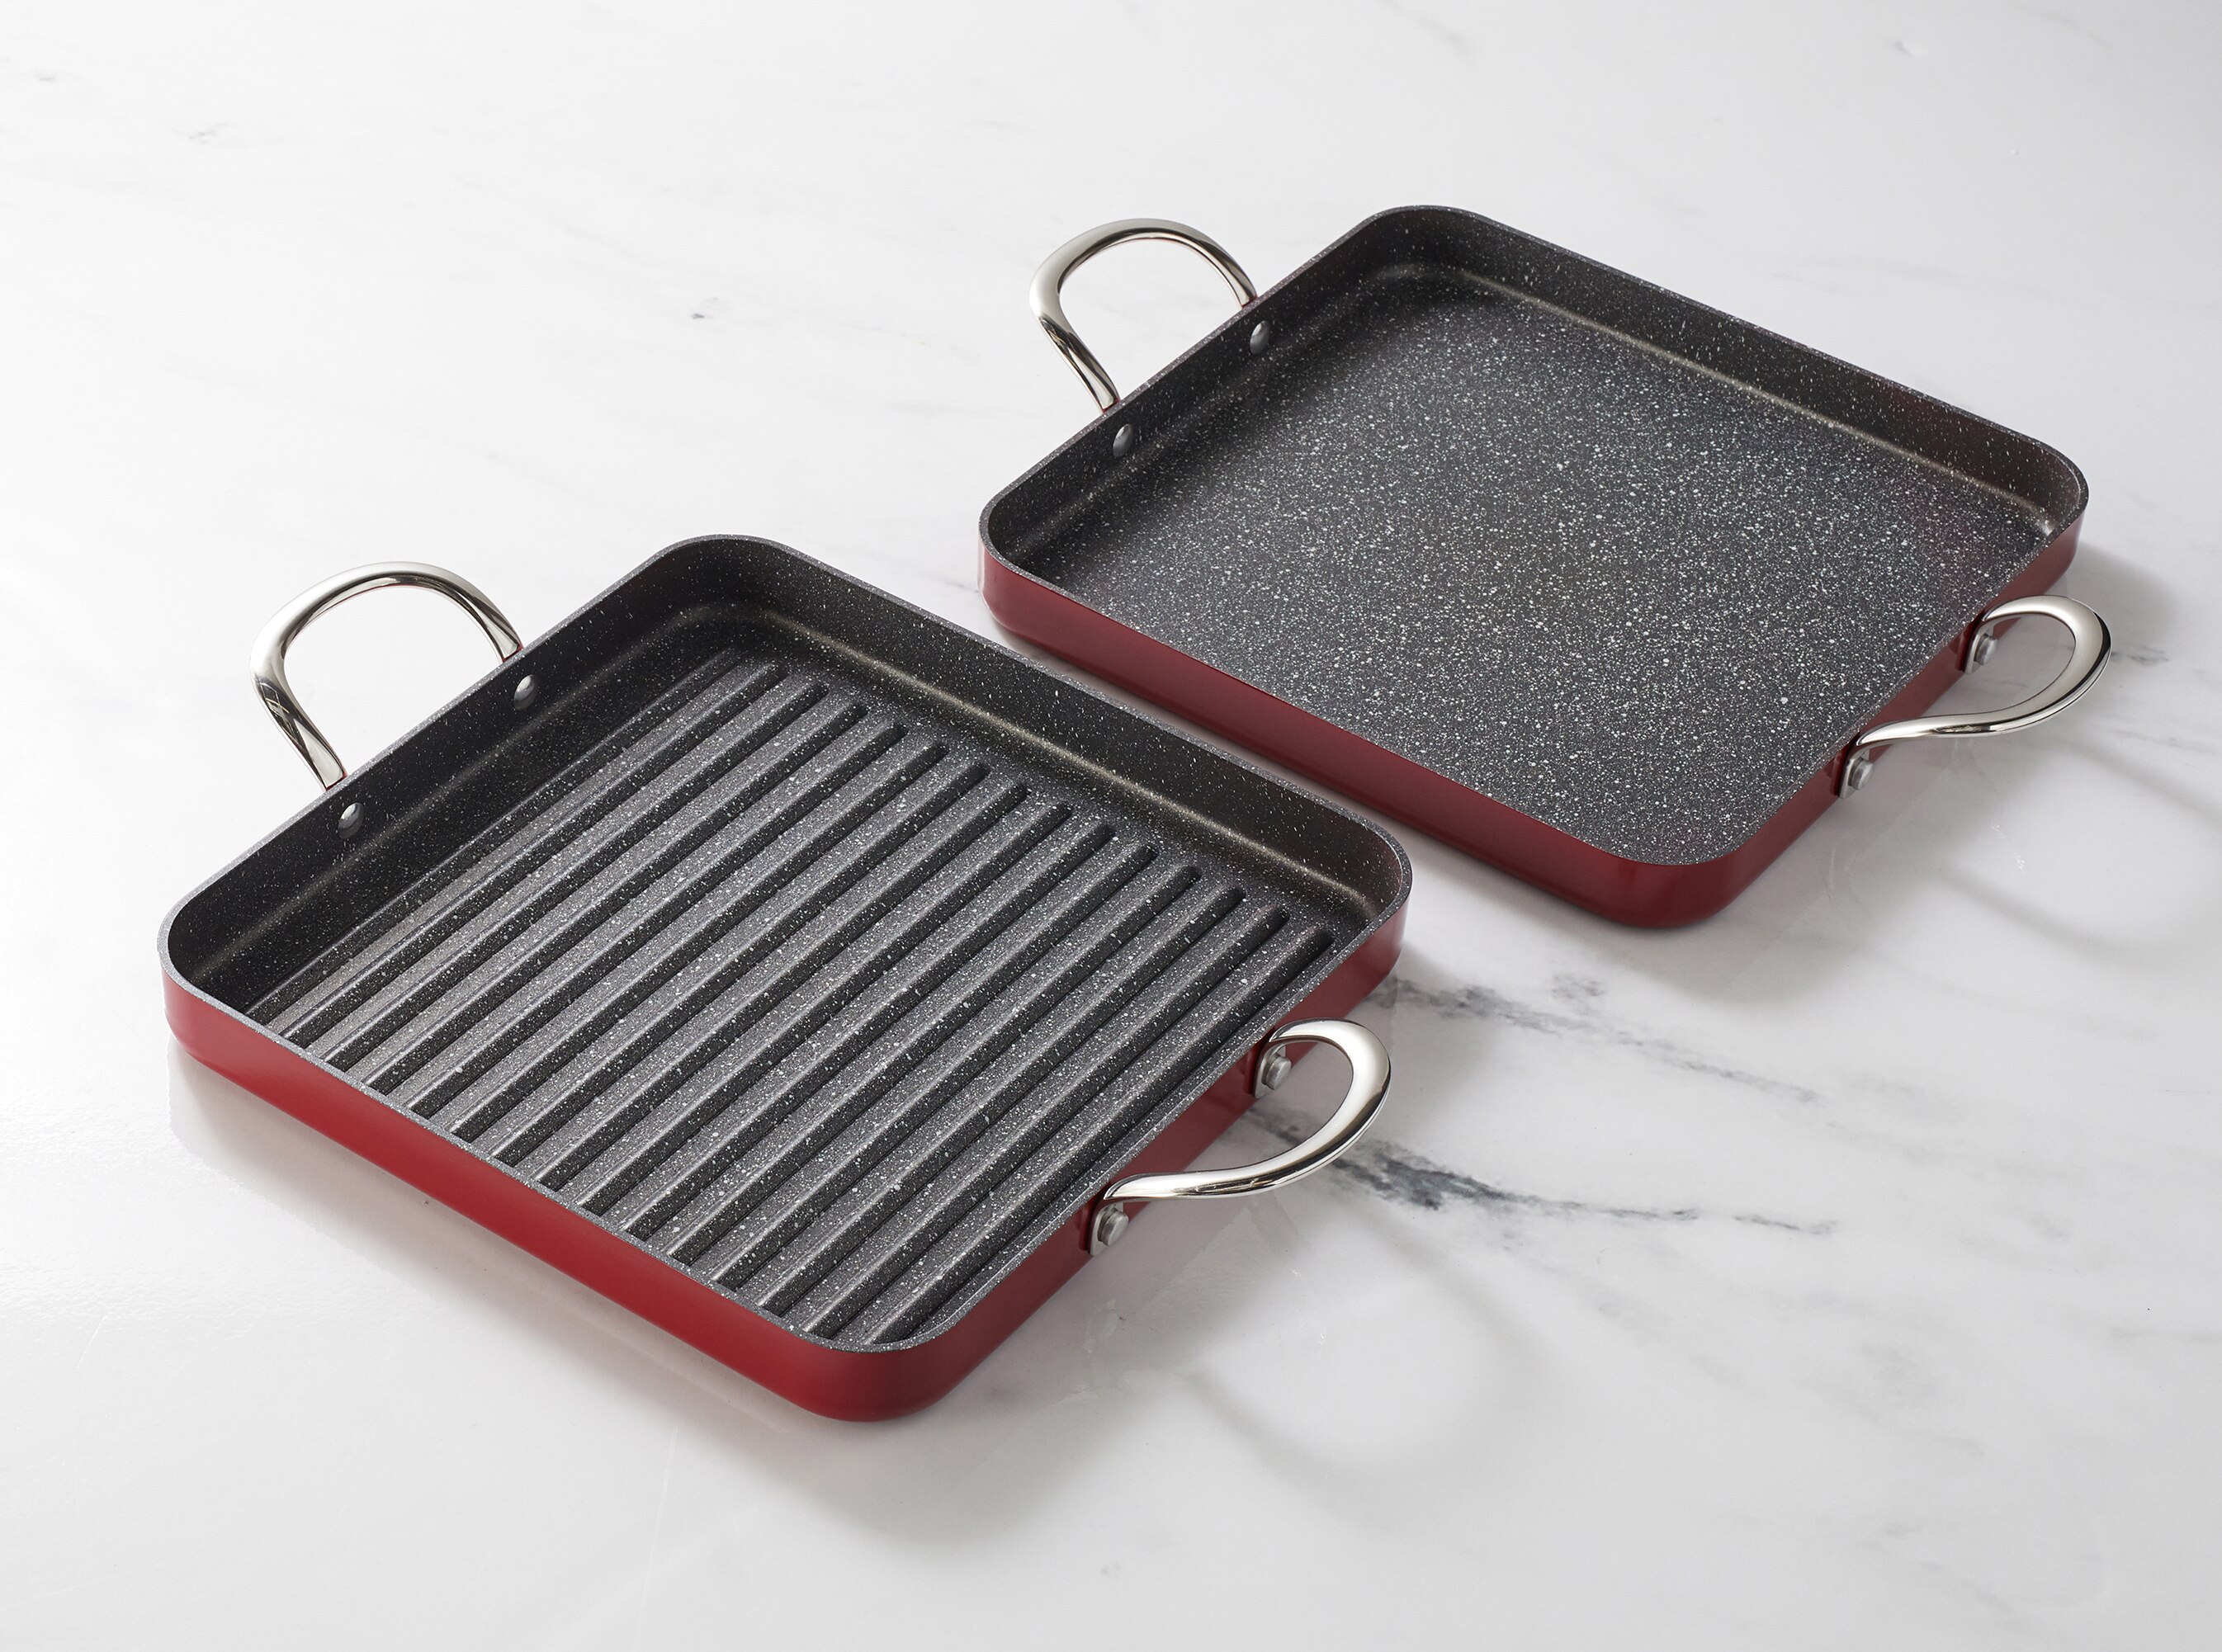 Cast Iron Skillets Square Griddle Pan real power 11 Inch Grill Pans for Stove Tops and Oven,Non Stick Deep Cooking Pan Steak Pan with Handle Red/Black 